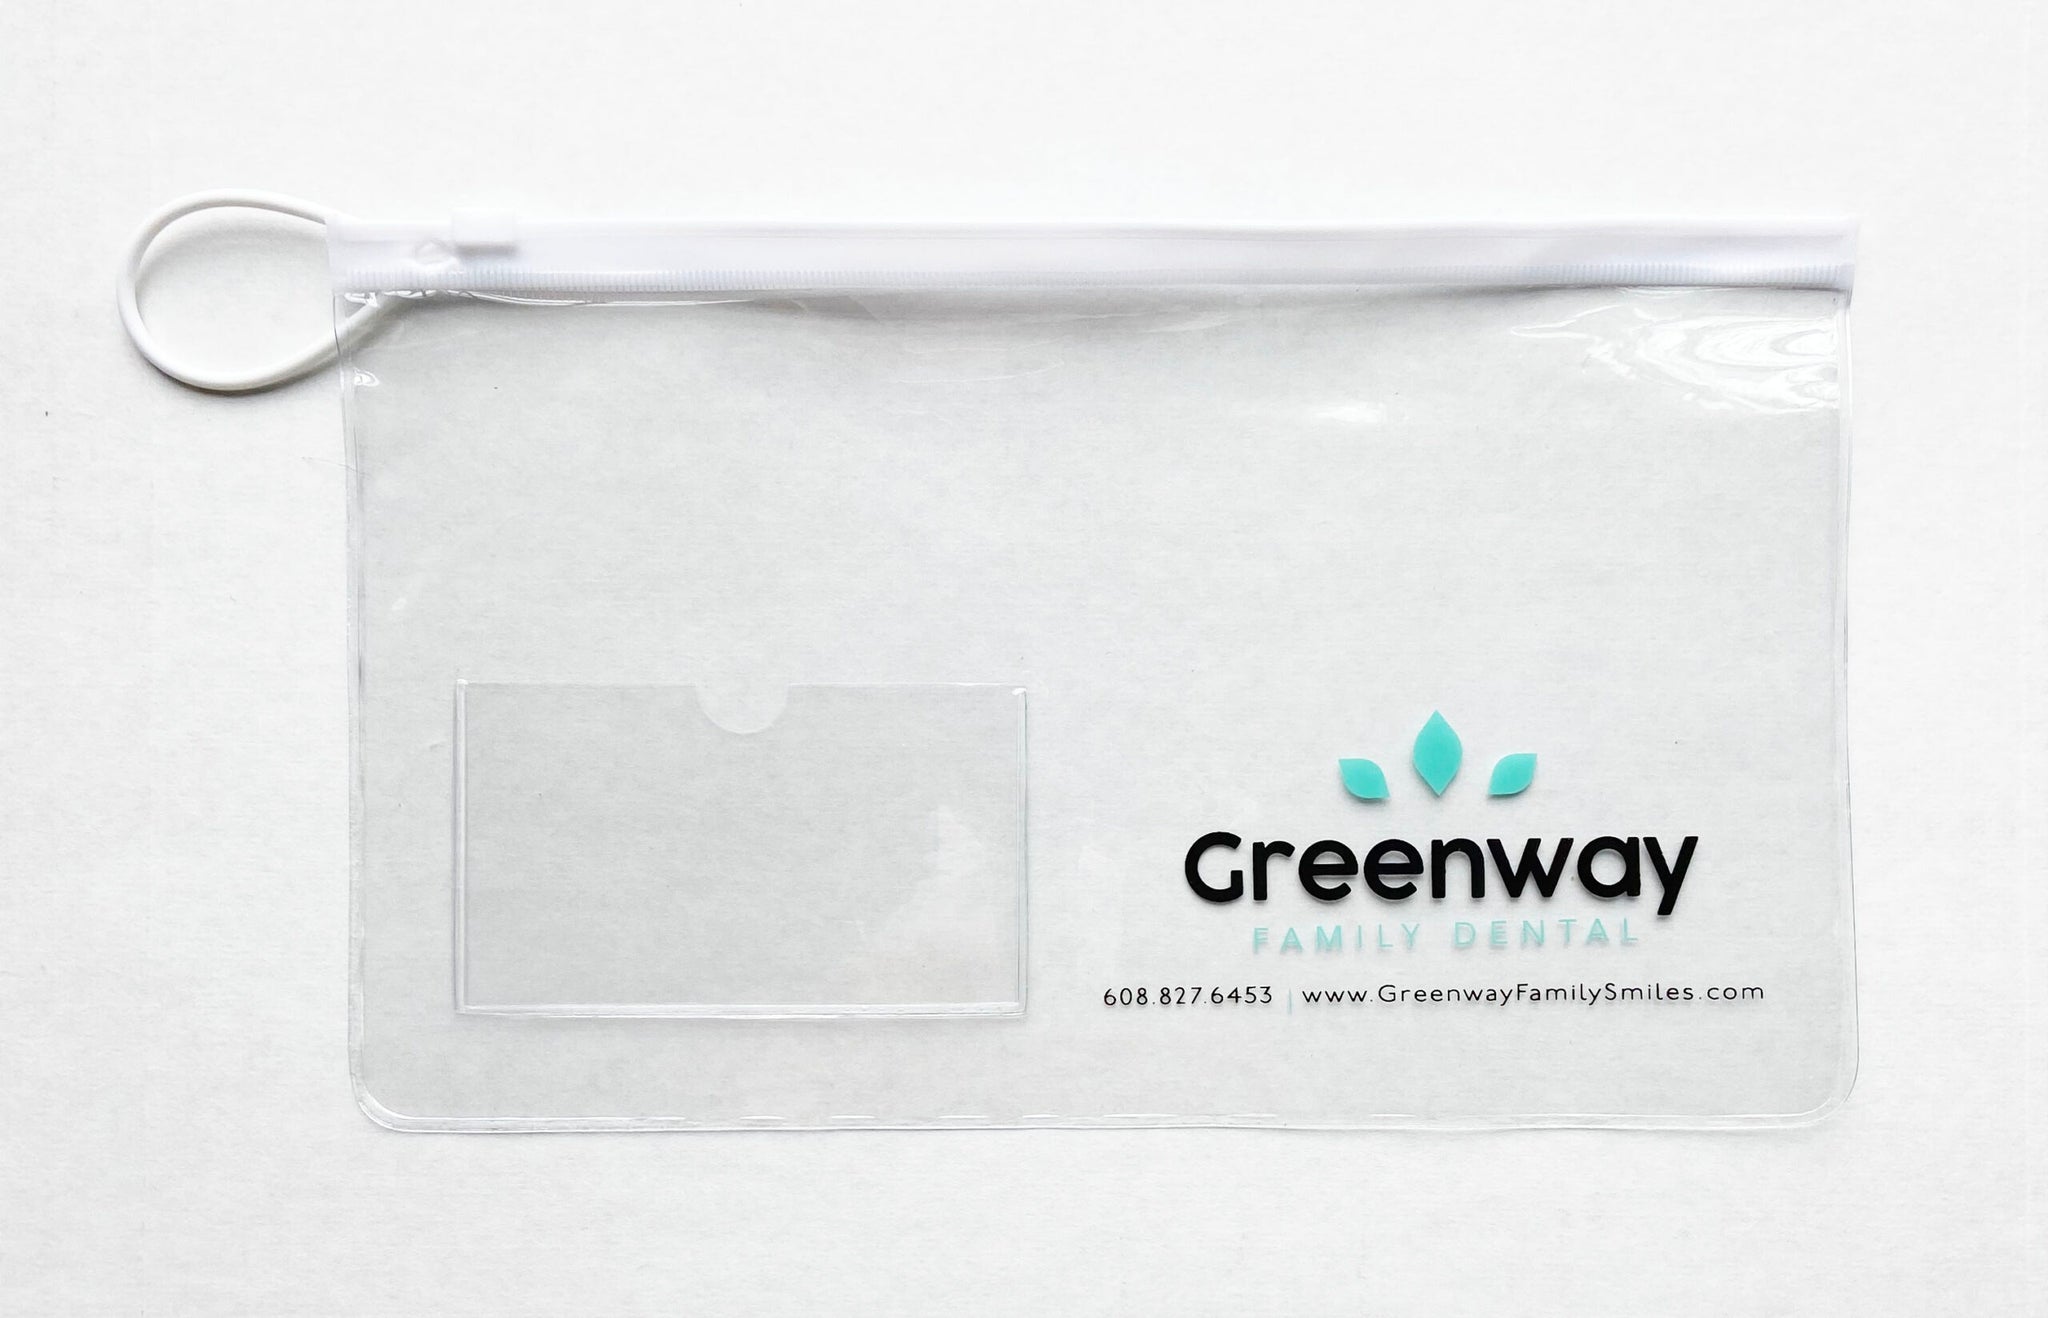 Greenway Family Dental Zippered Bags